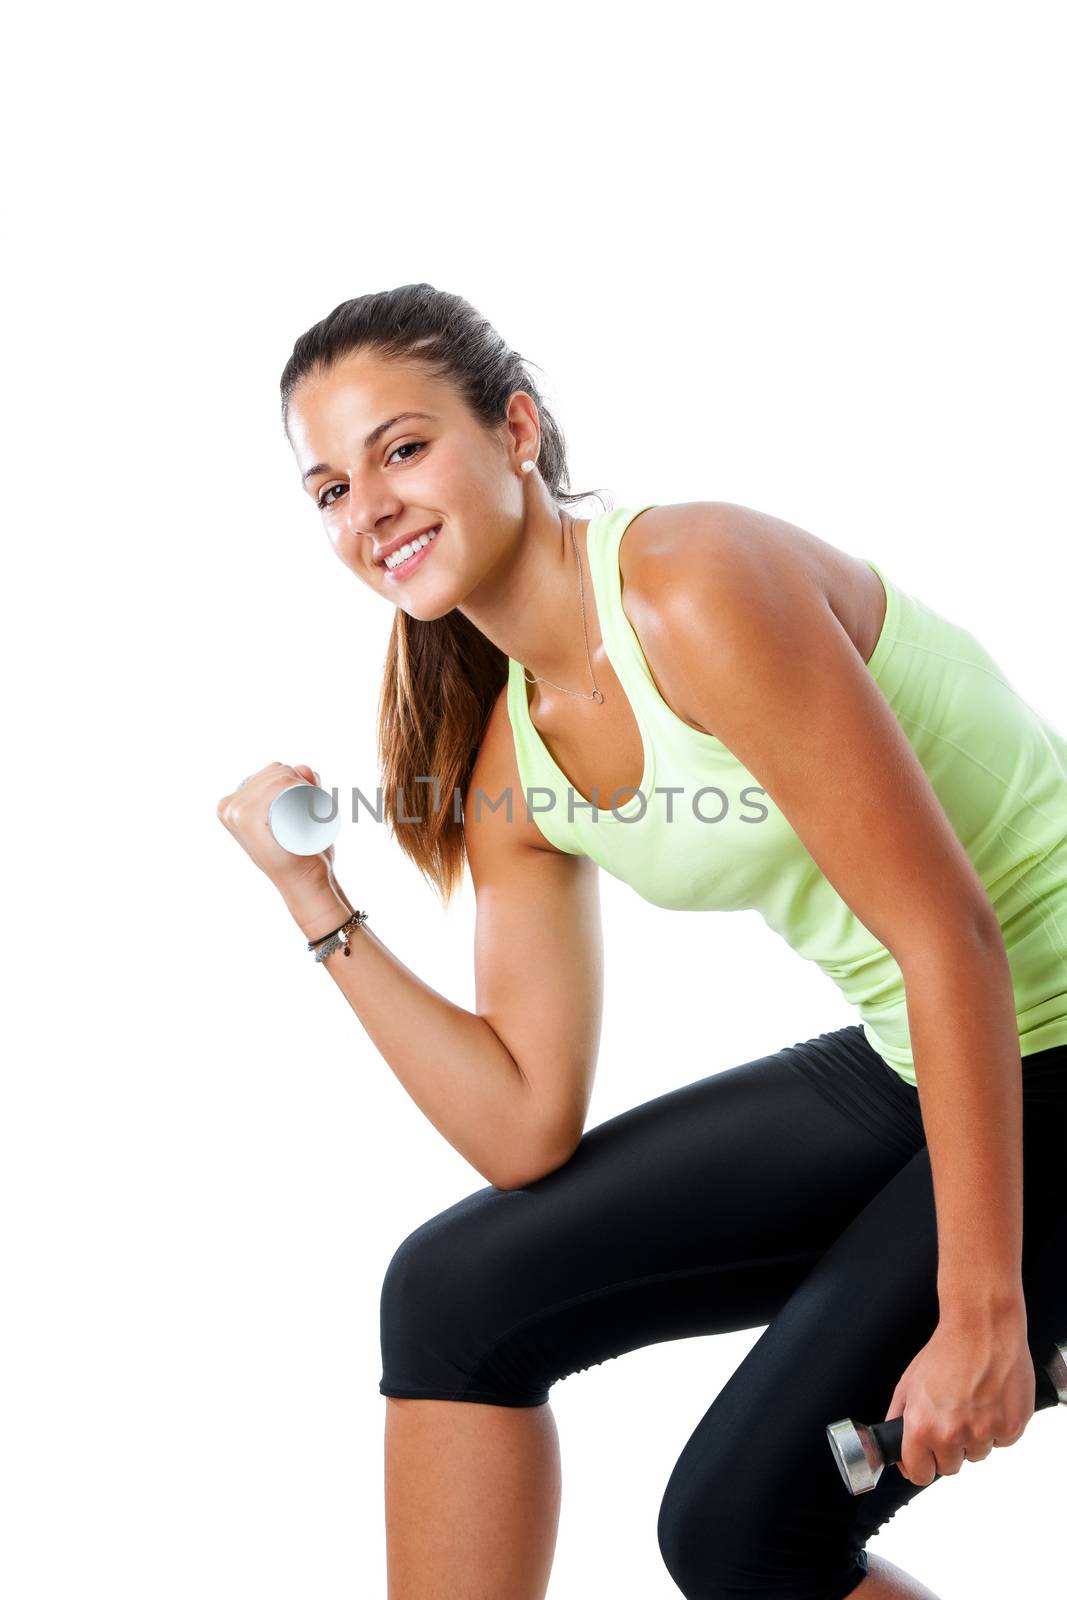 Close up portrait of attractive young girl doing muscle exercise with dumbbells.Isolated on white background.